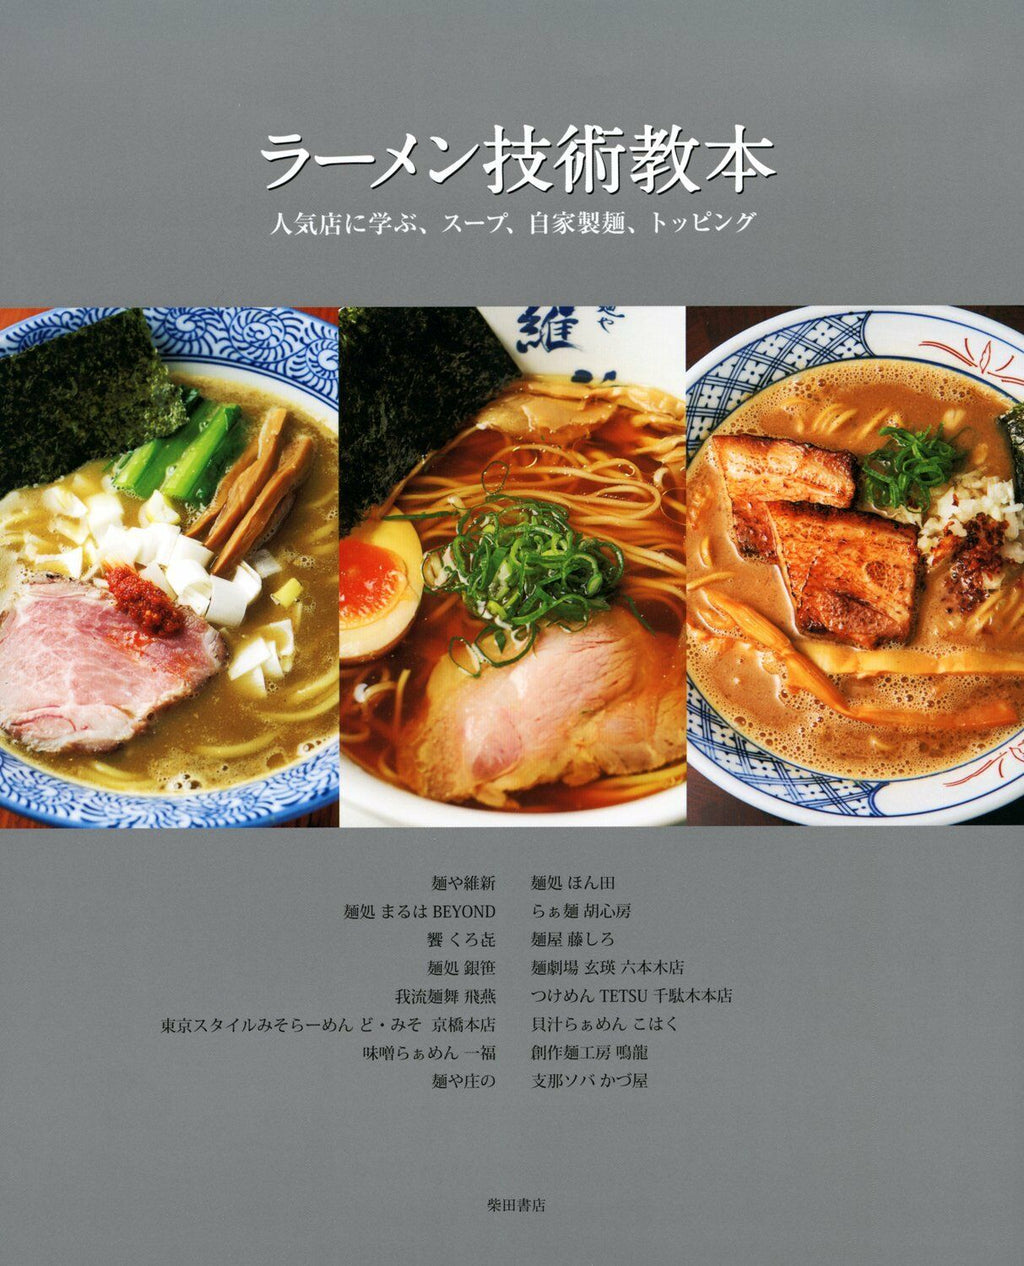 NEW' RAMEN Techniques Cook Book | JAPAN Learn from Popular Noodle Shop